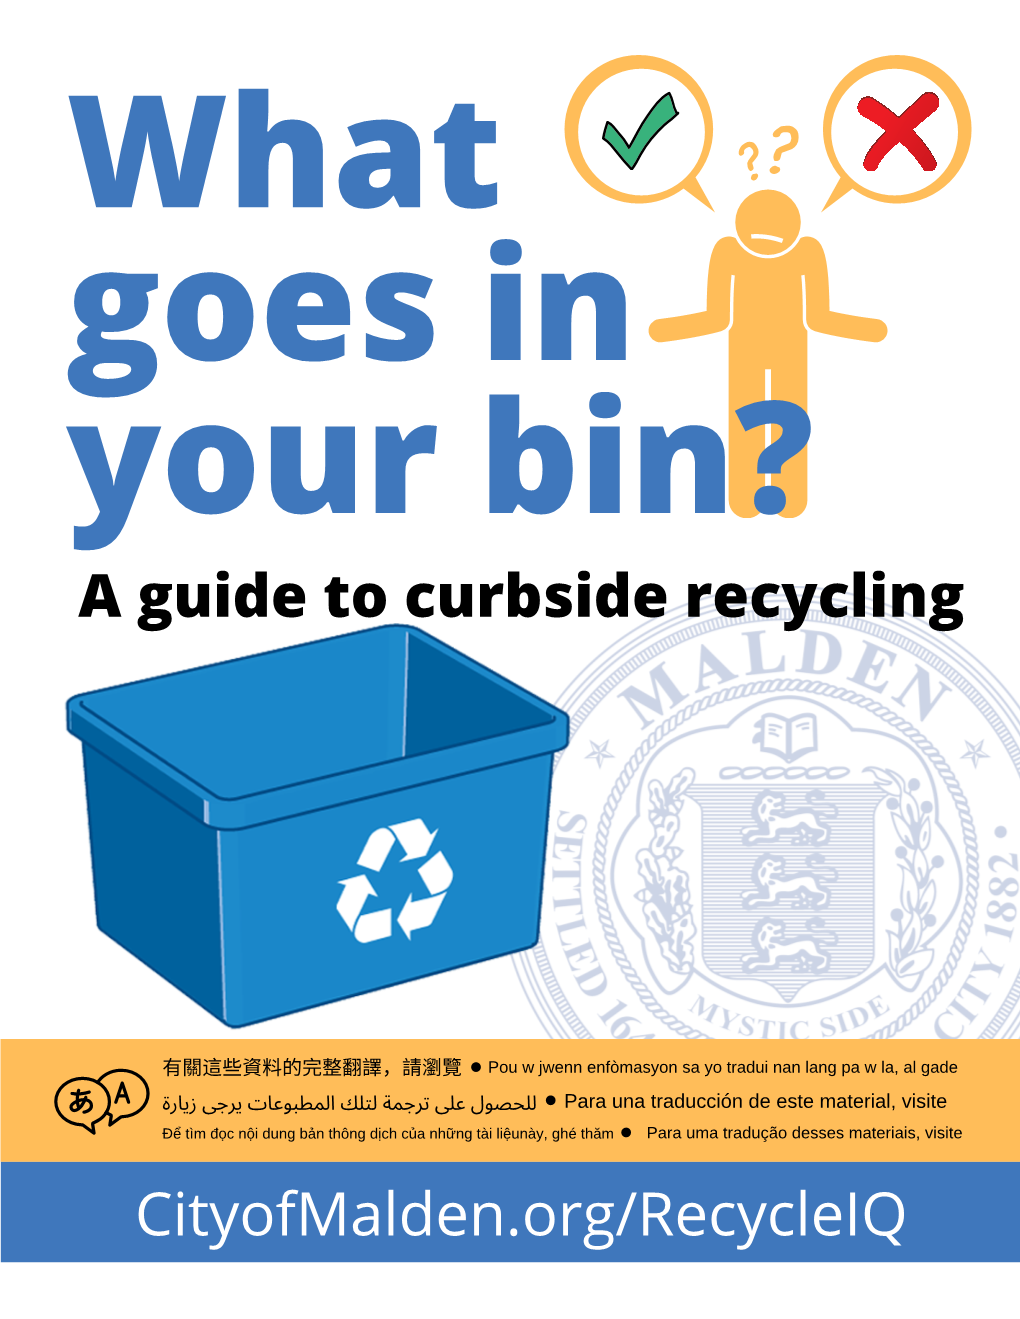 What's in Your Bin?